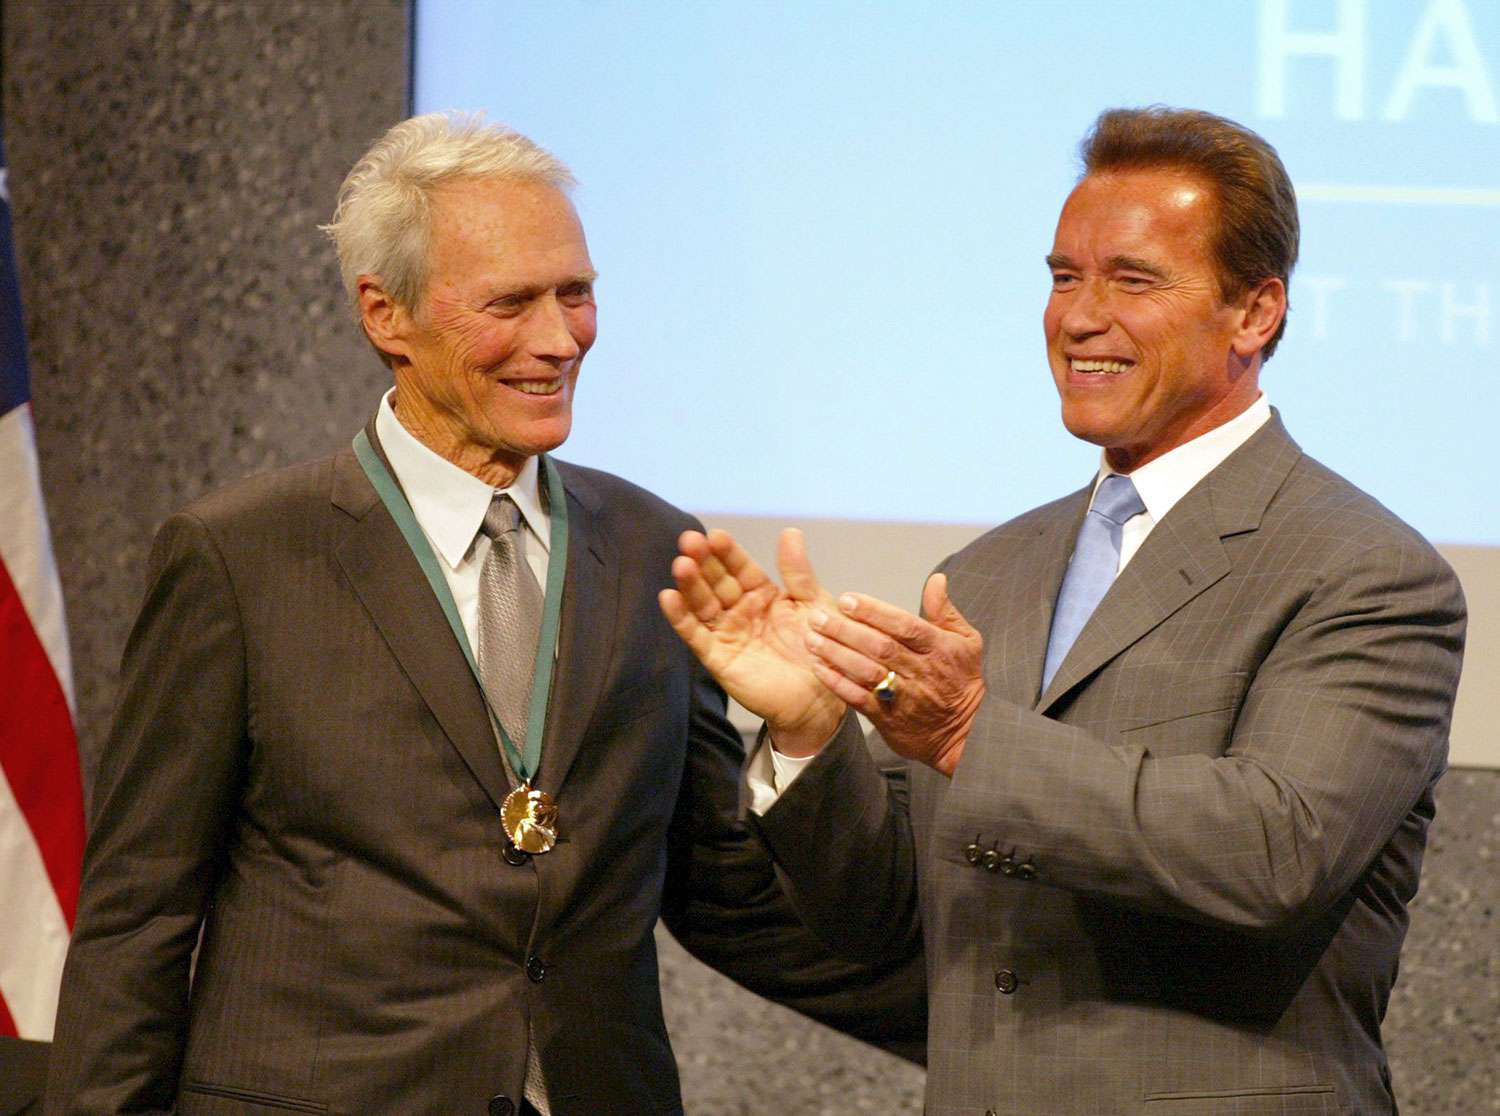 Clint Eastwood and Arnold Schwarzenegger in 2006